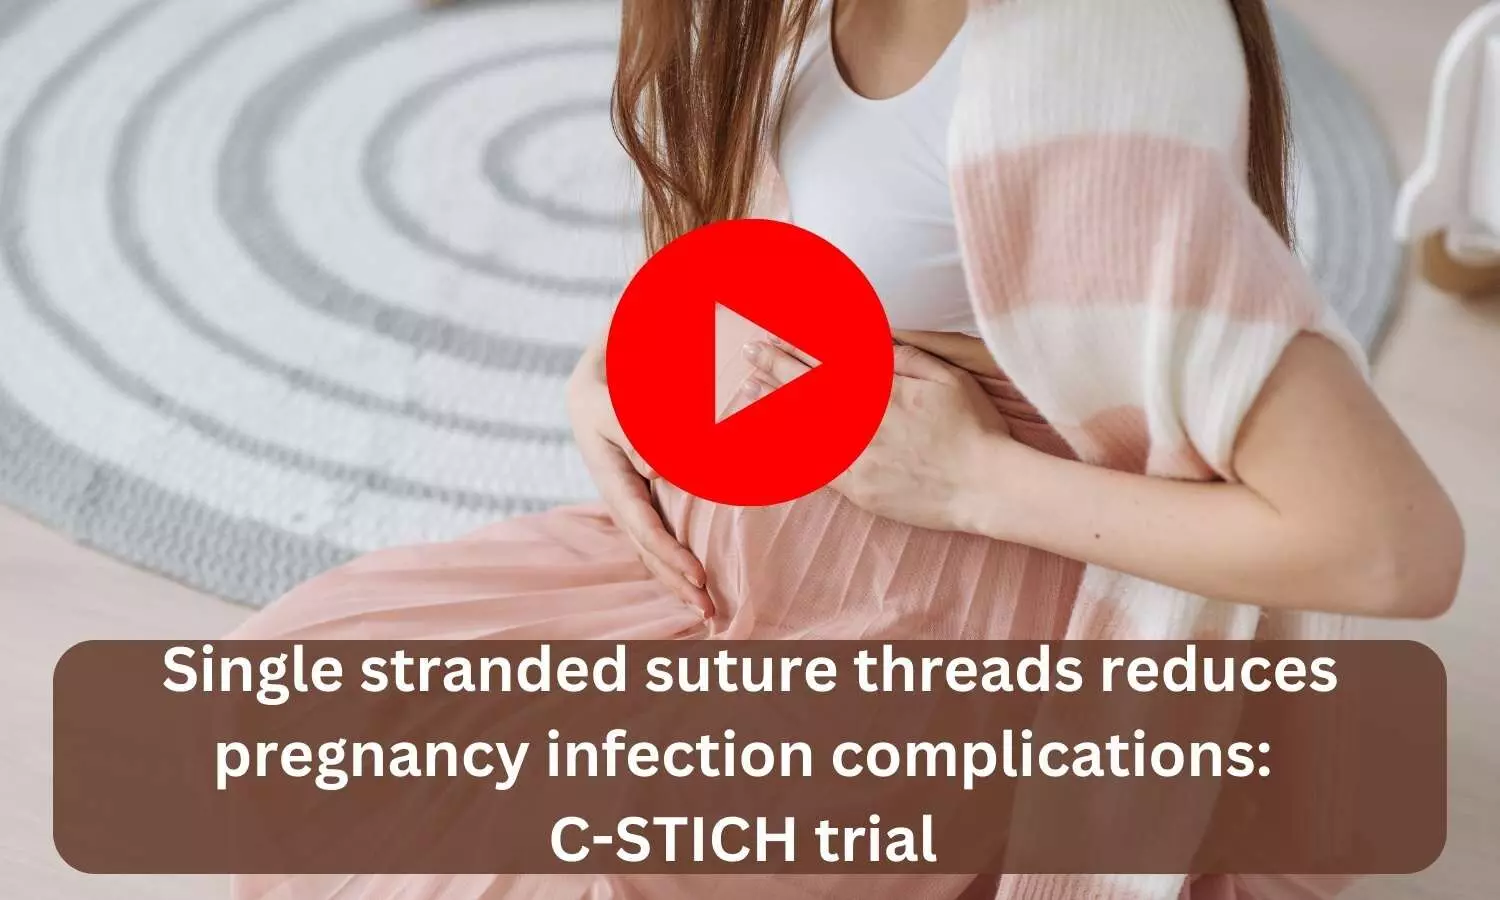 Single stranded suture threads reduces pregnancy infection complications: C-STICH trial